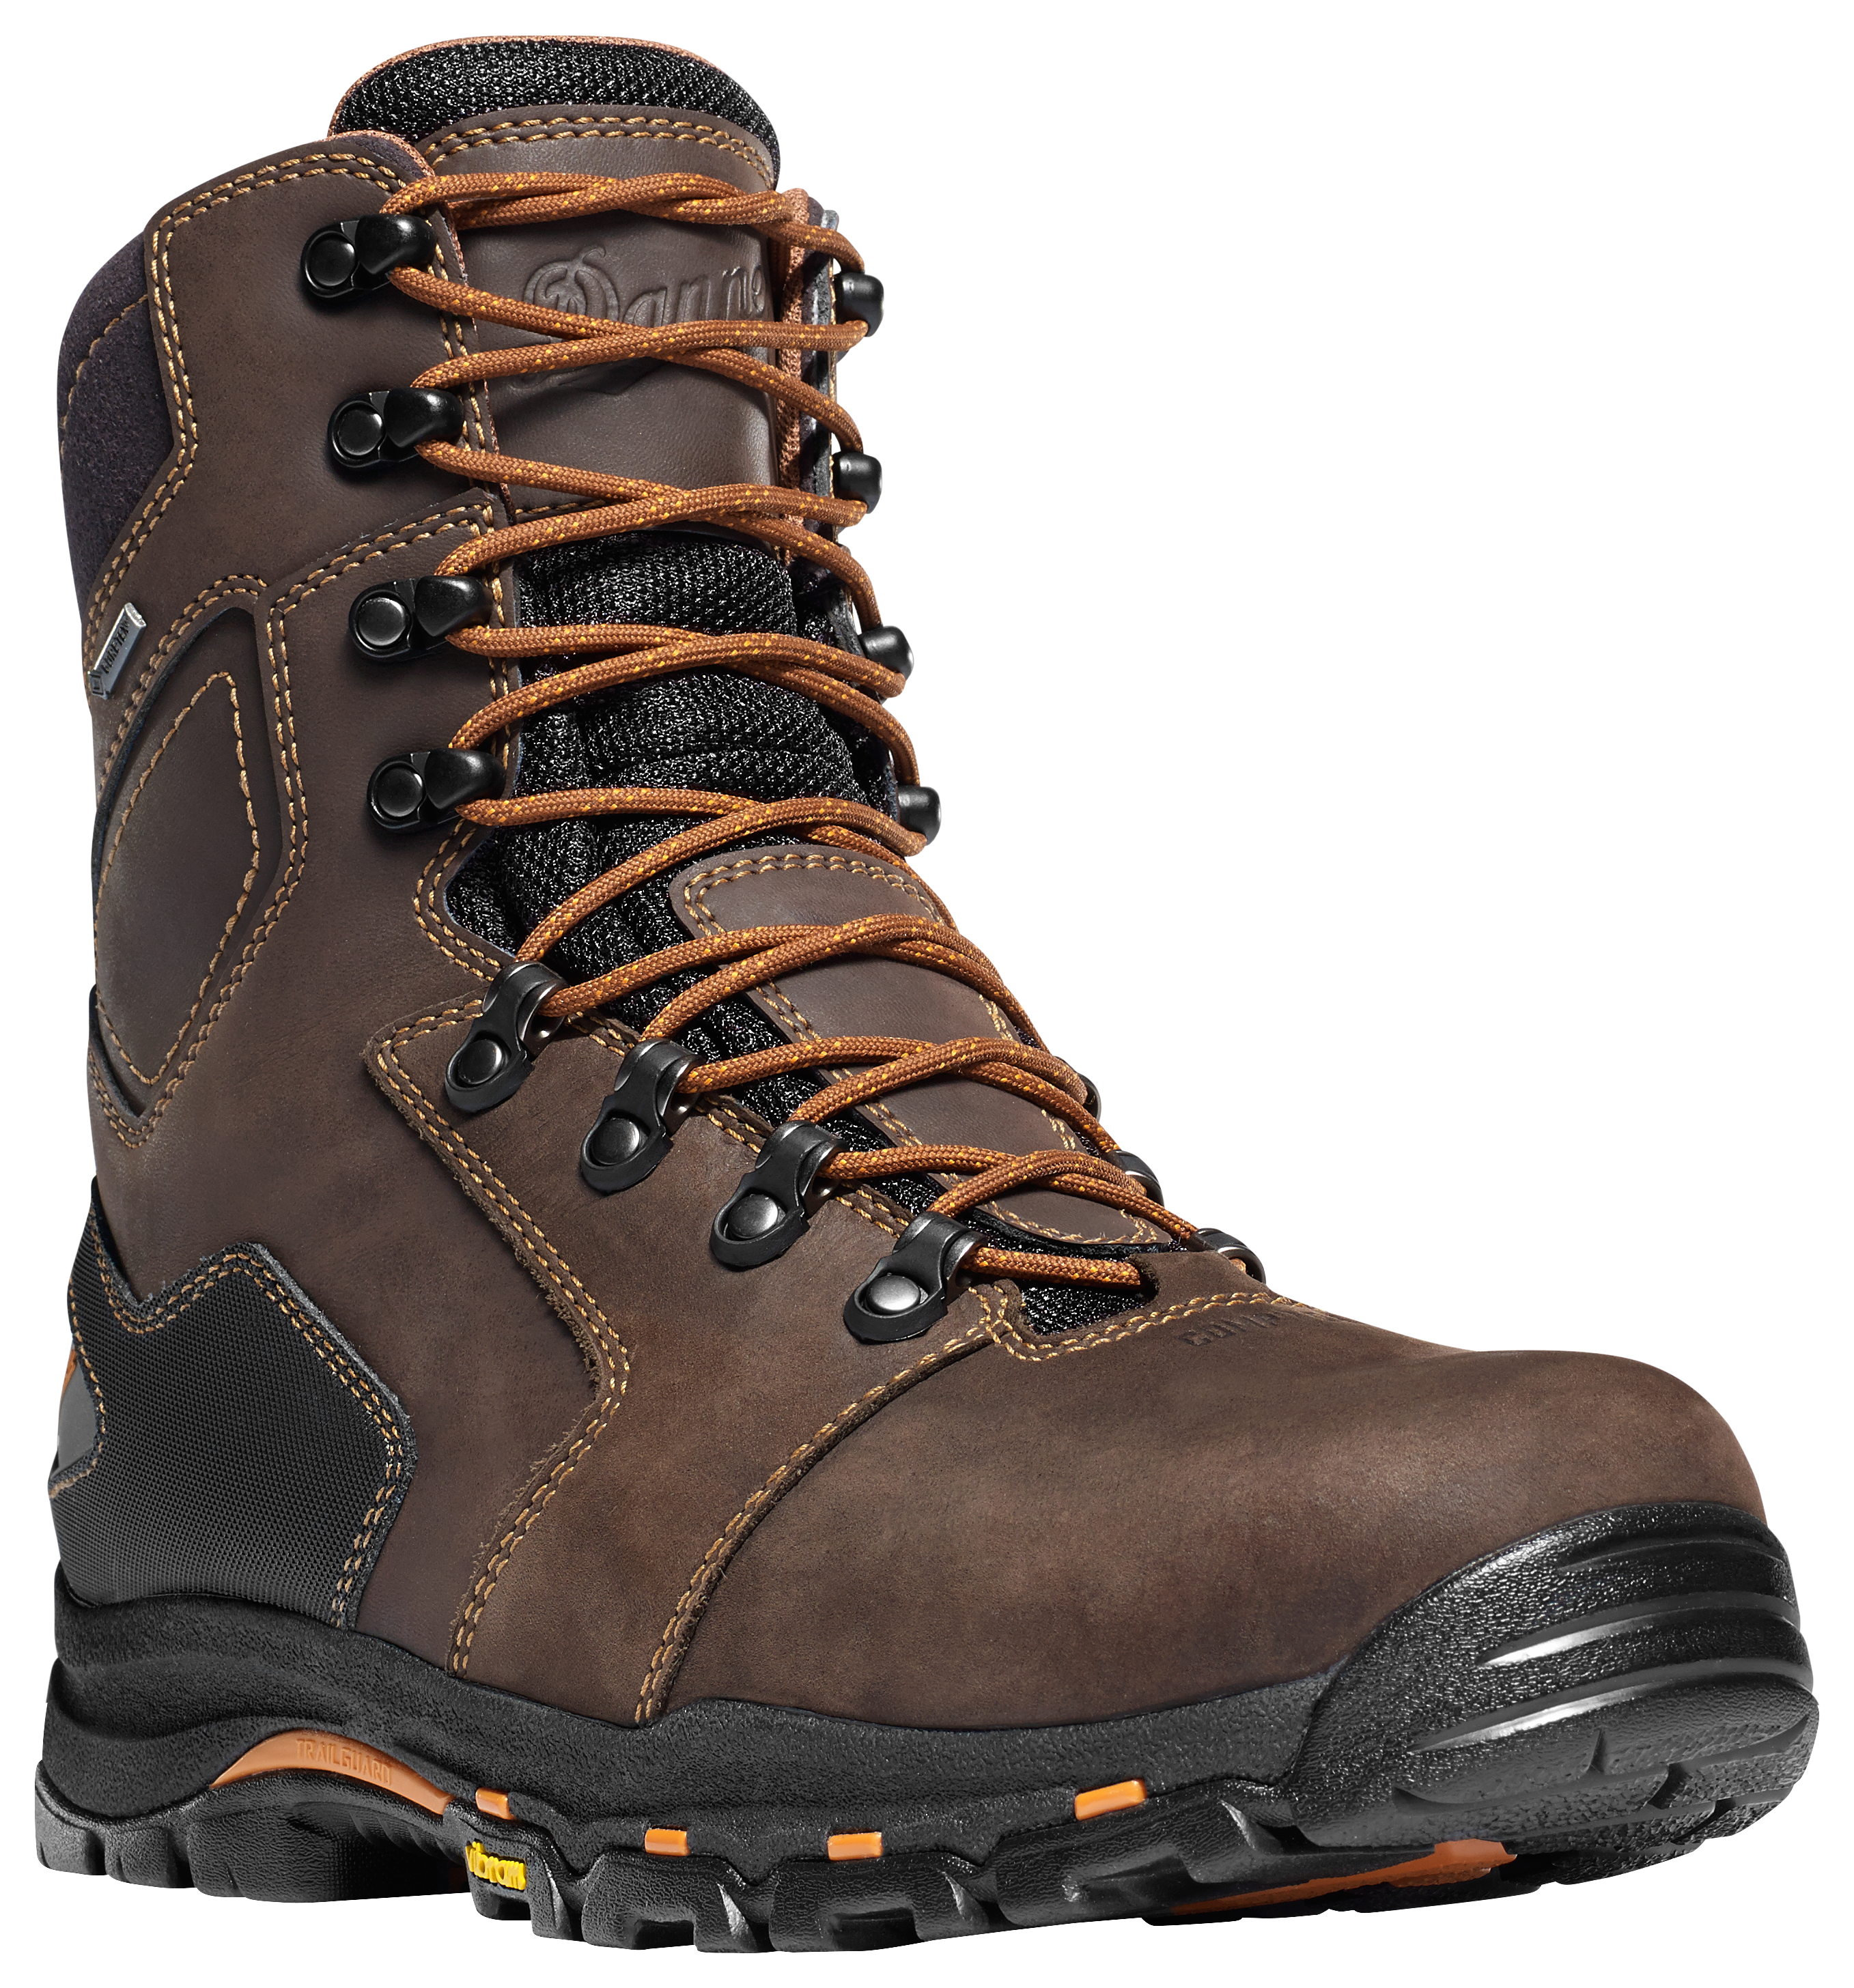 Danner Vicious GORE-TEX Composite Toe Work Boots for Men - Brown - 8W